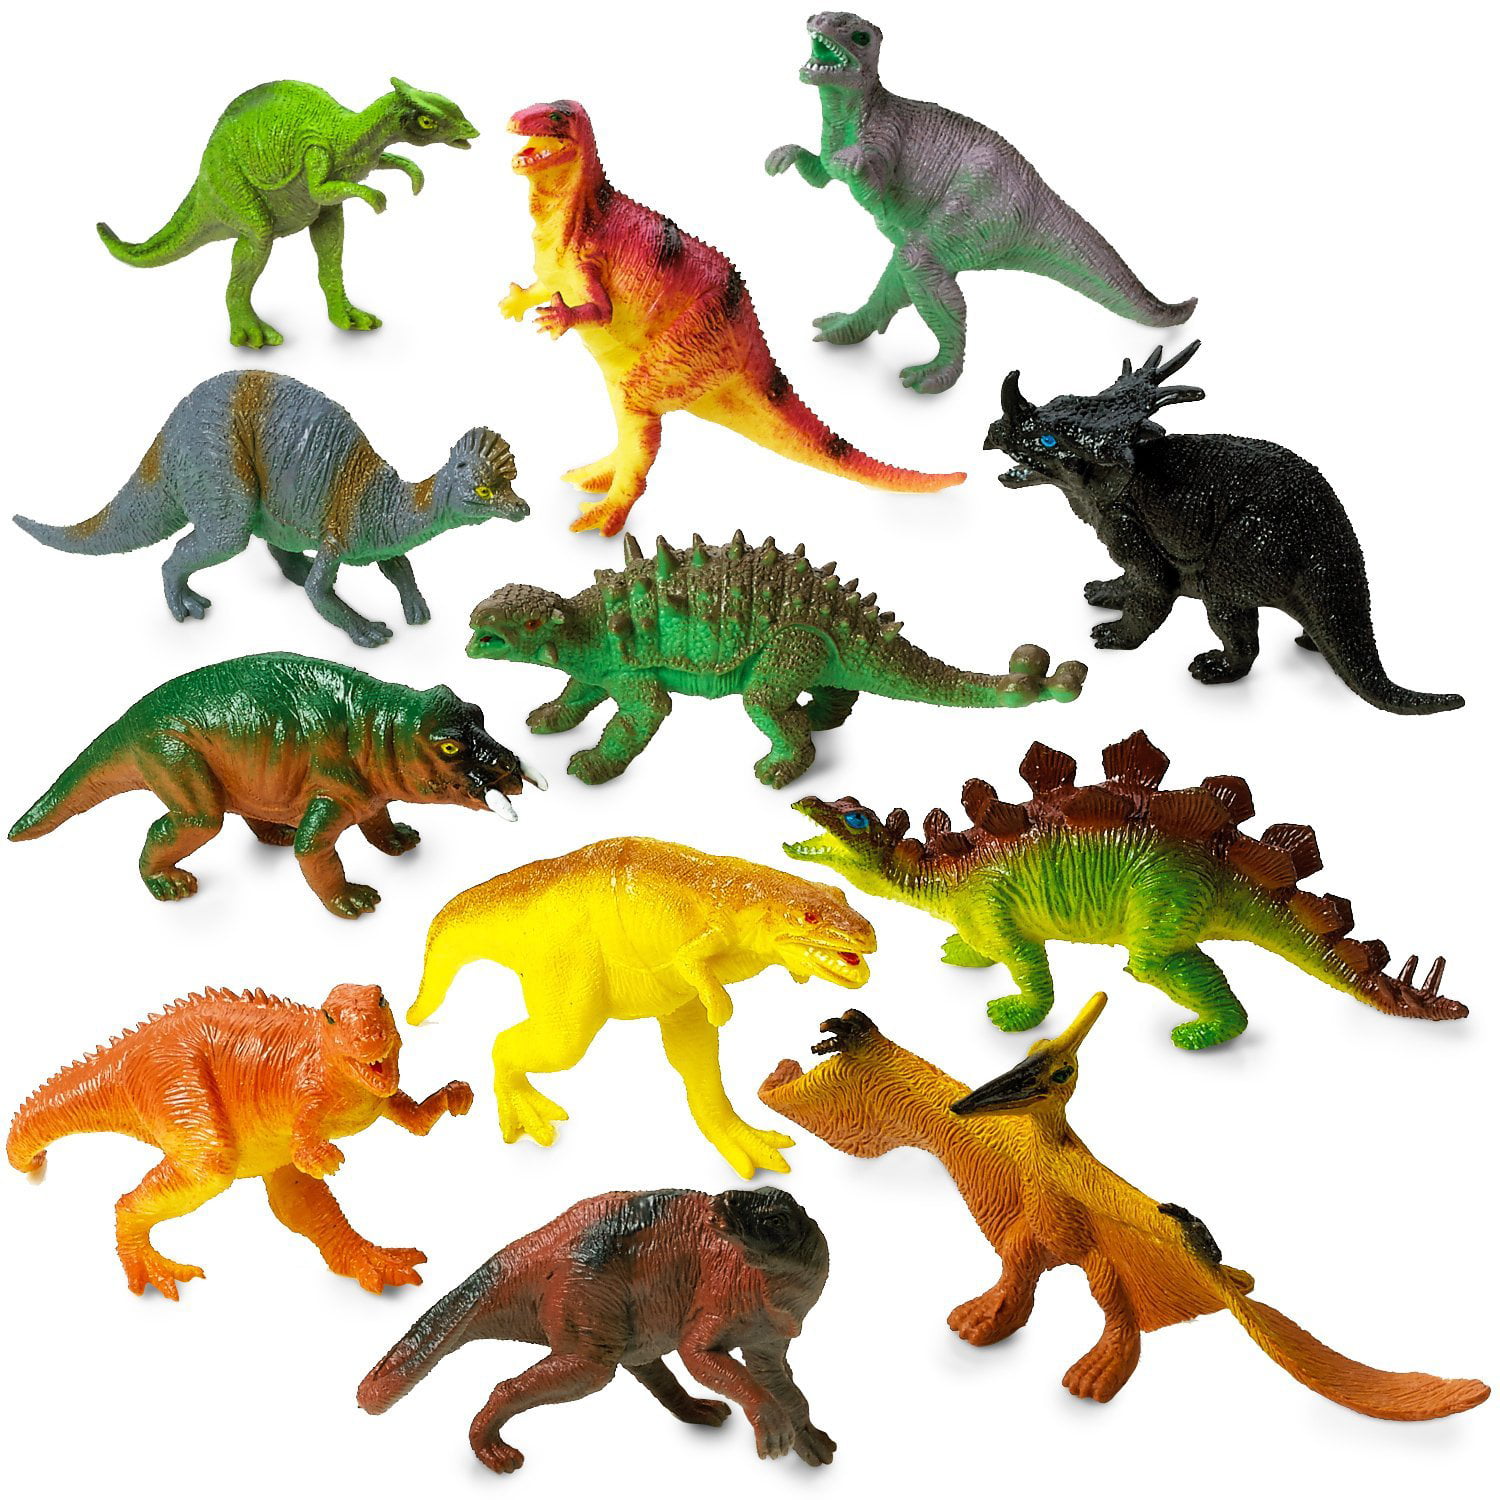 Brachiosaurus Dinosaur 3D Eraser- Great for Party Favors School Supplies Gift Basket and so Much More! 